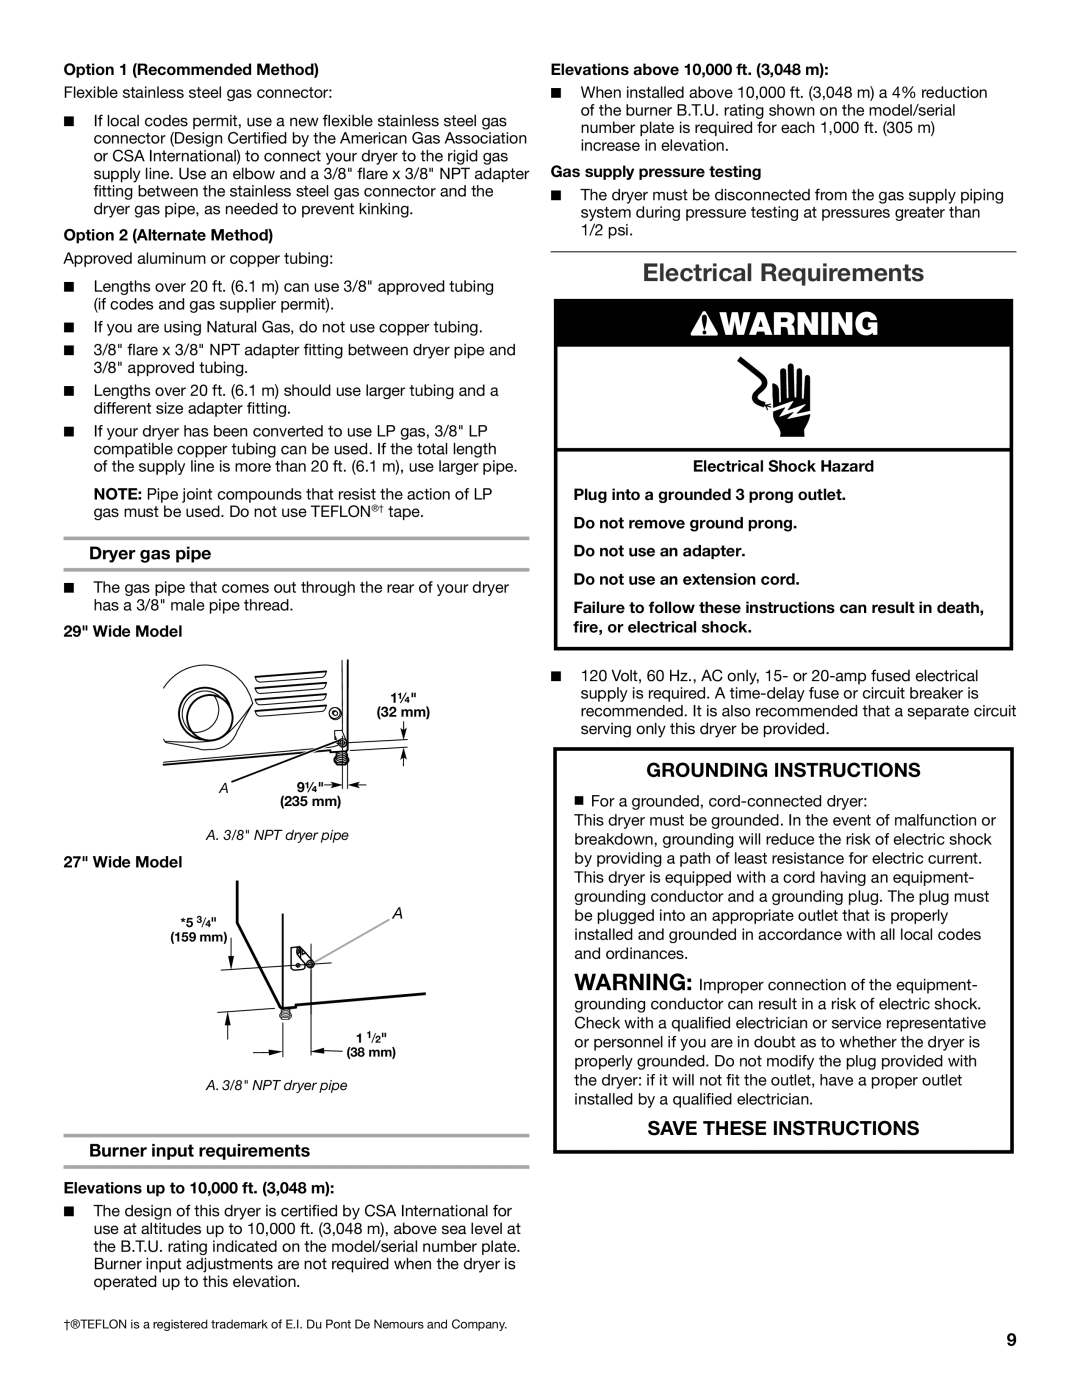 Maytag W10097000A-SP, W10096984A Electrical Requirements, Grounding Instructions, Save These Instructions, Dryer gas pipe 